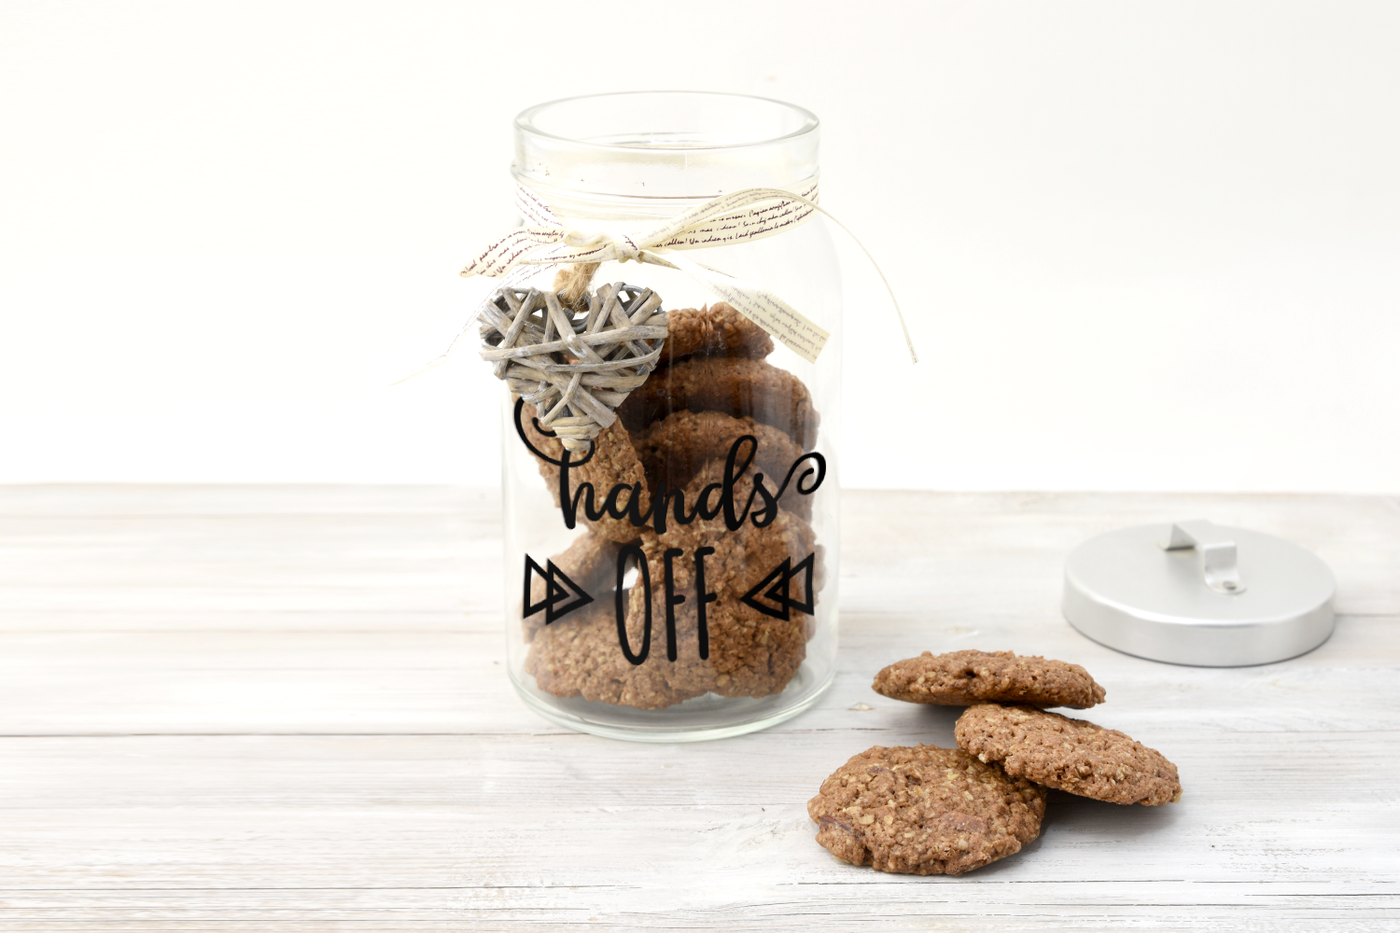 Cookie jar filled with cookies. On the jar, it says  "hands OFF" with decorative triangles on either side.